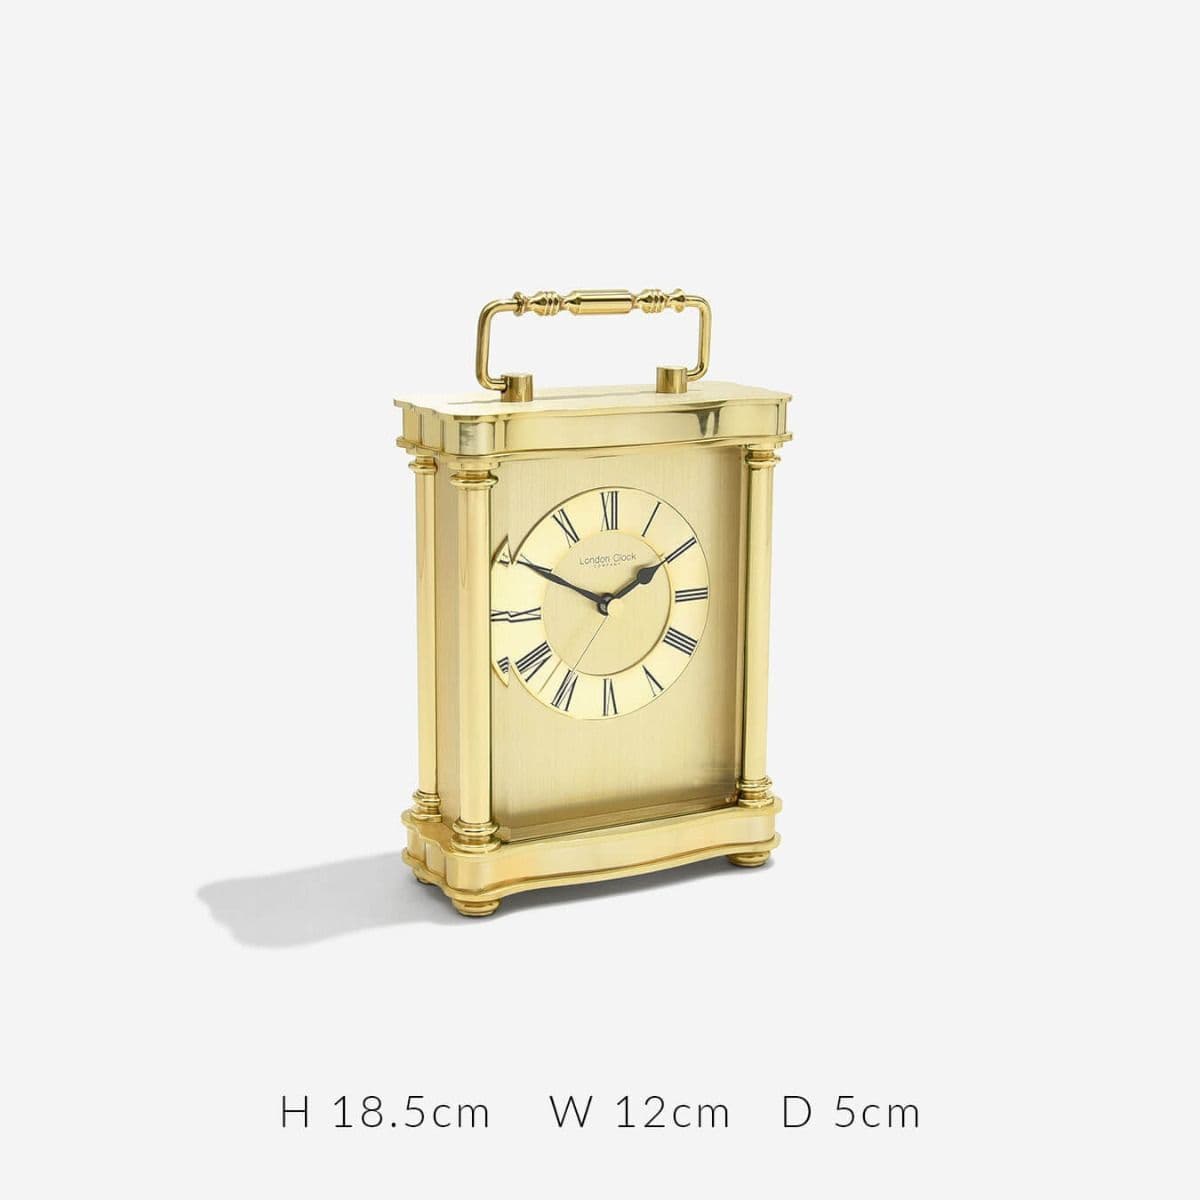 London Clock Company Gold Finish Carriage Mantle Clock 03067